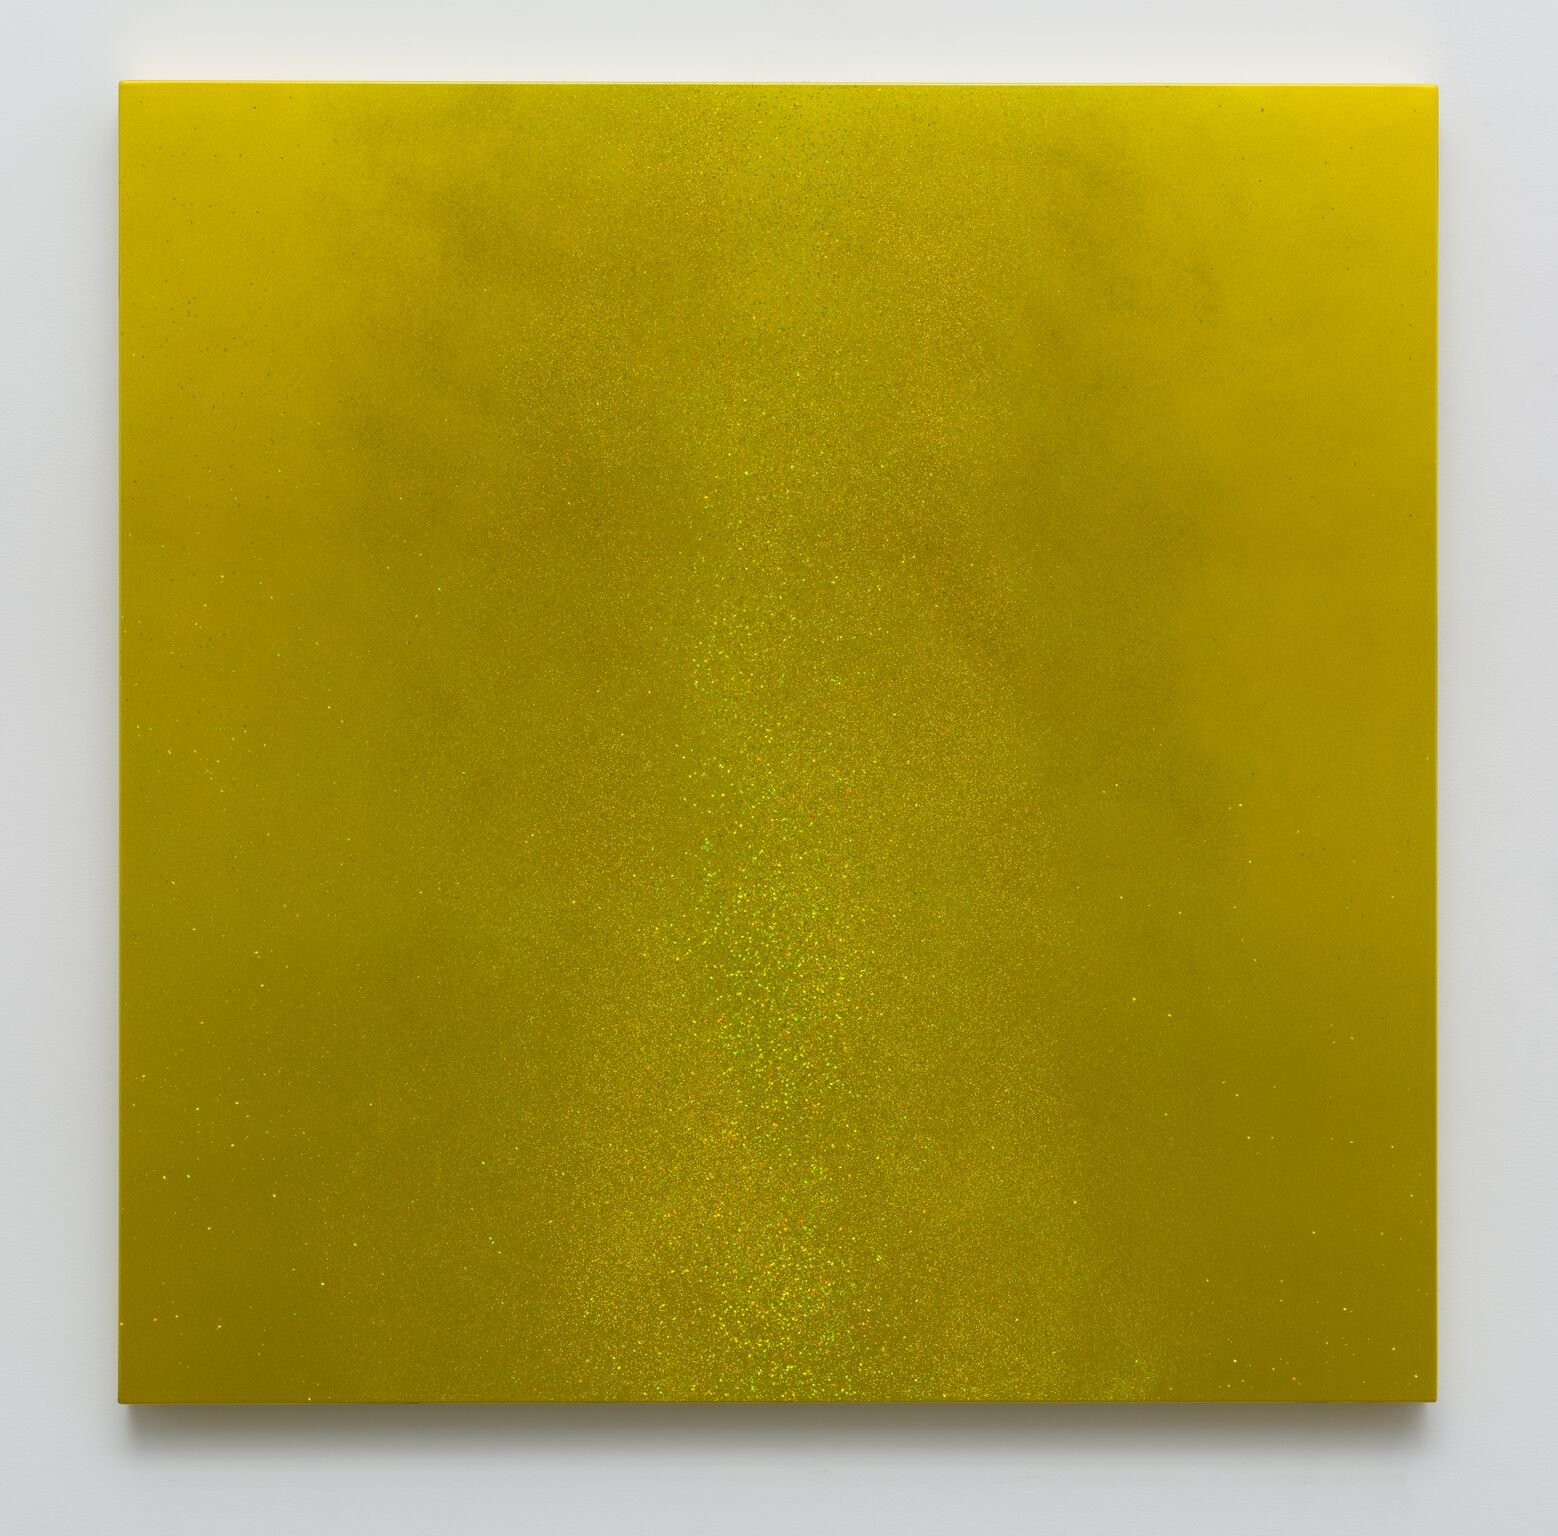  Rubén Ortiz Torres  Fools Gold  , 2016 urethane, metal flake, and candy paint on aluminum 48 x 48 x 1 1/2 in&nbsp; (121.9 x 121.9 x 3.8 cm) 